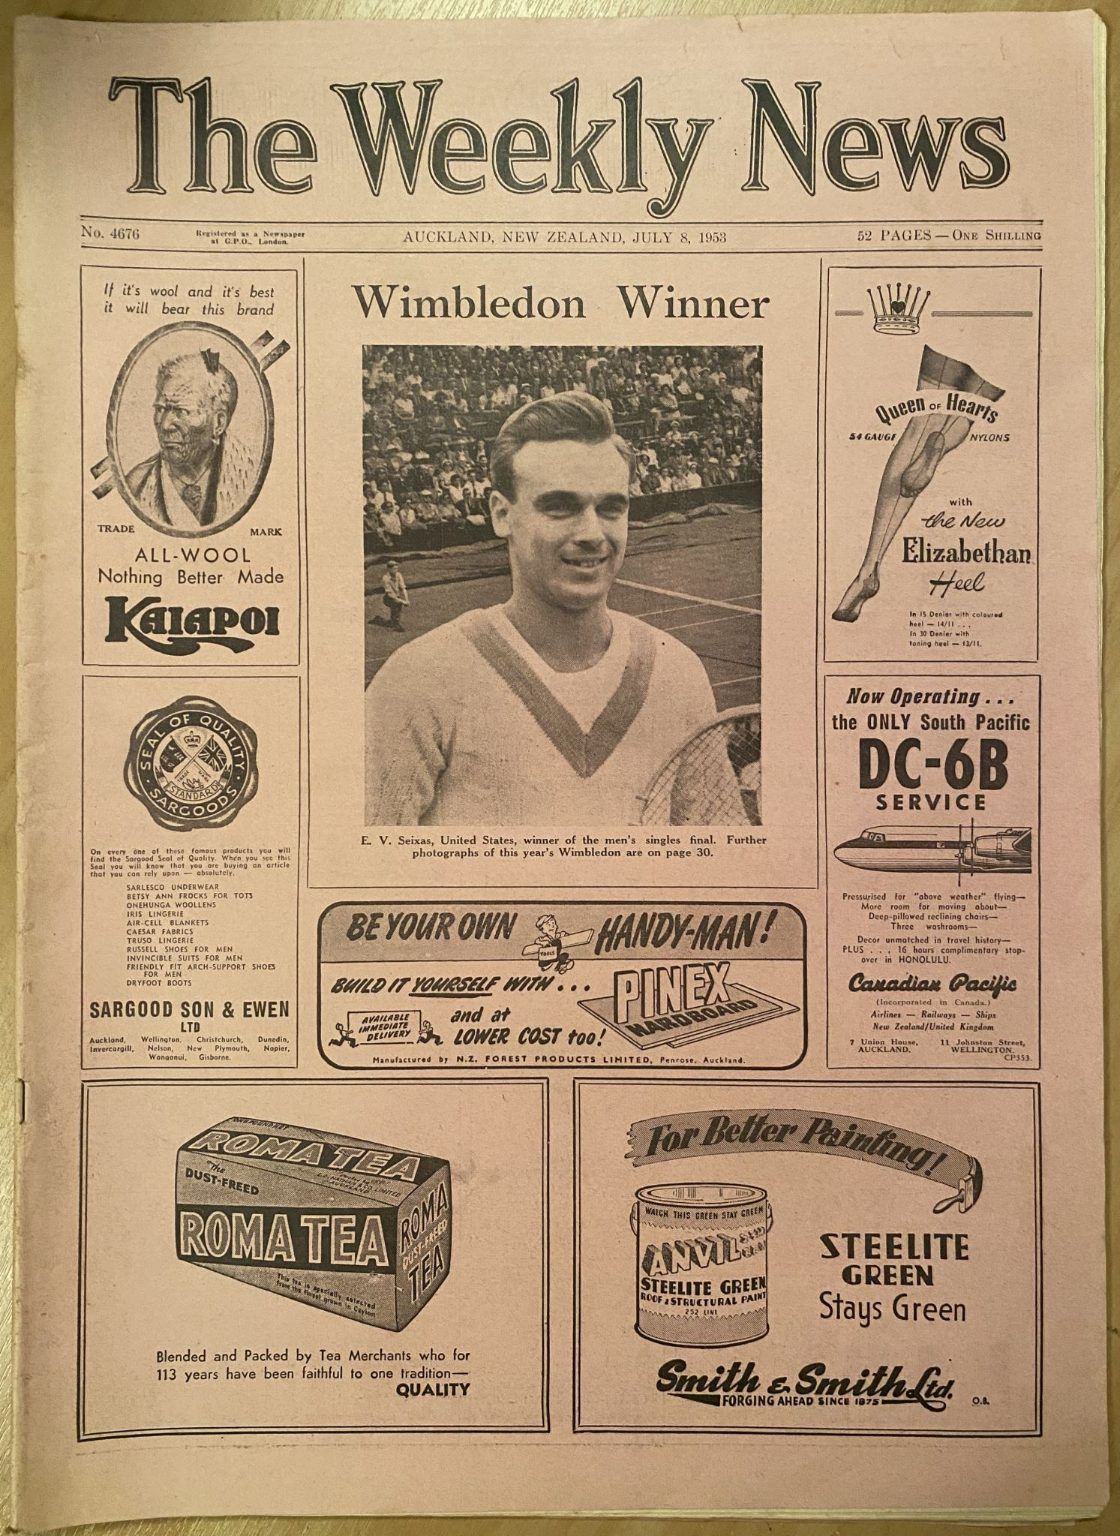 OLD NEWSPAPER: The Weekly News - No. 4676, 8 July 1953